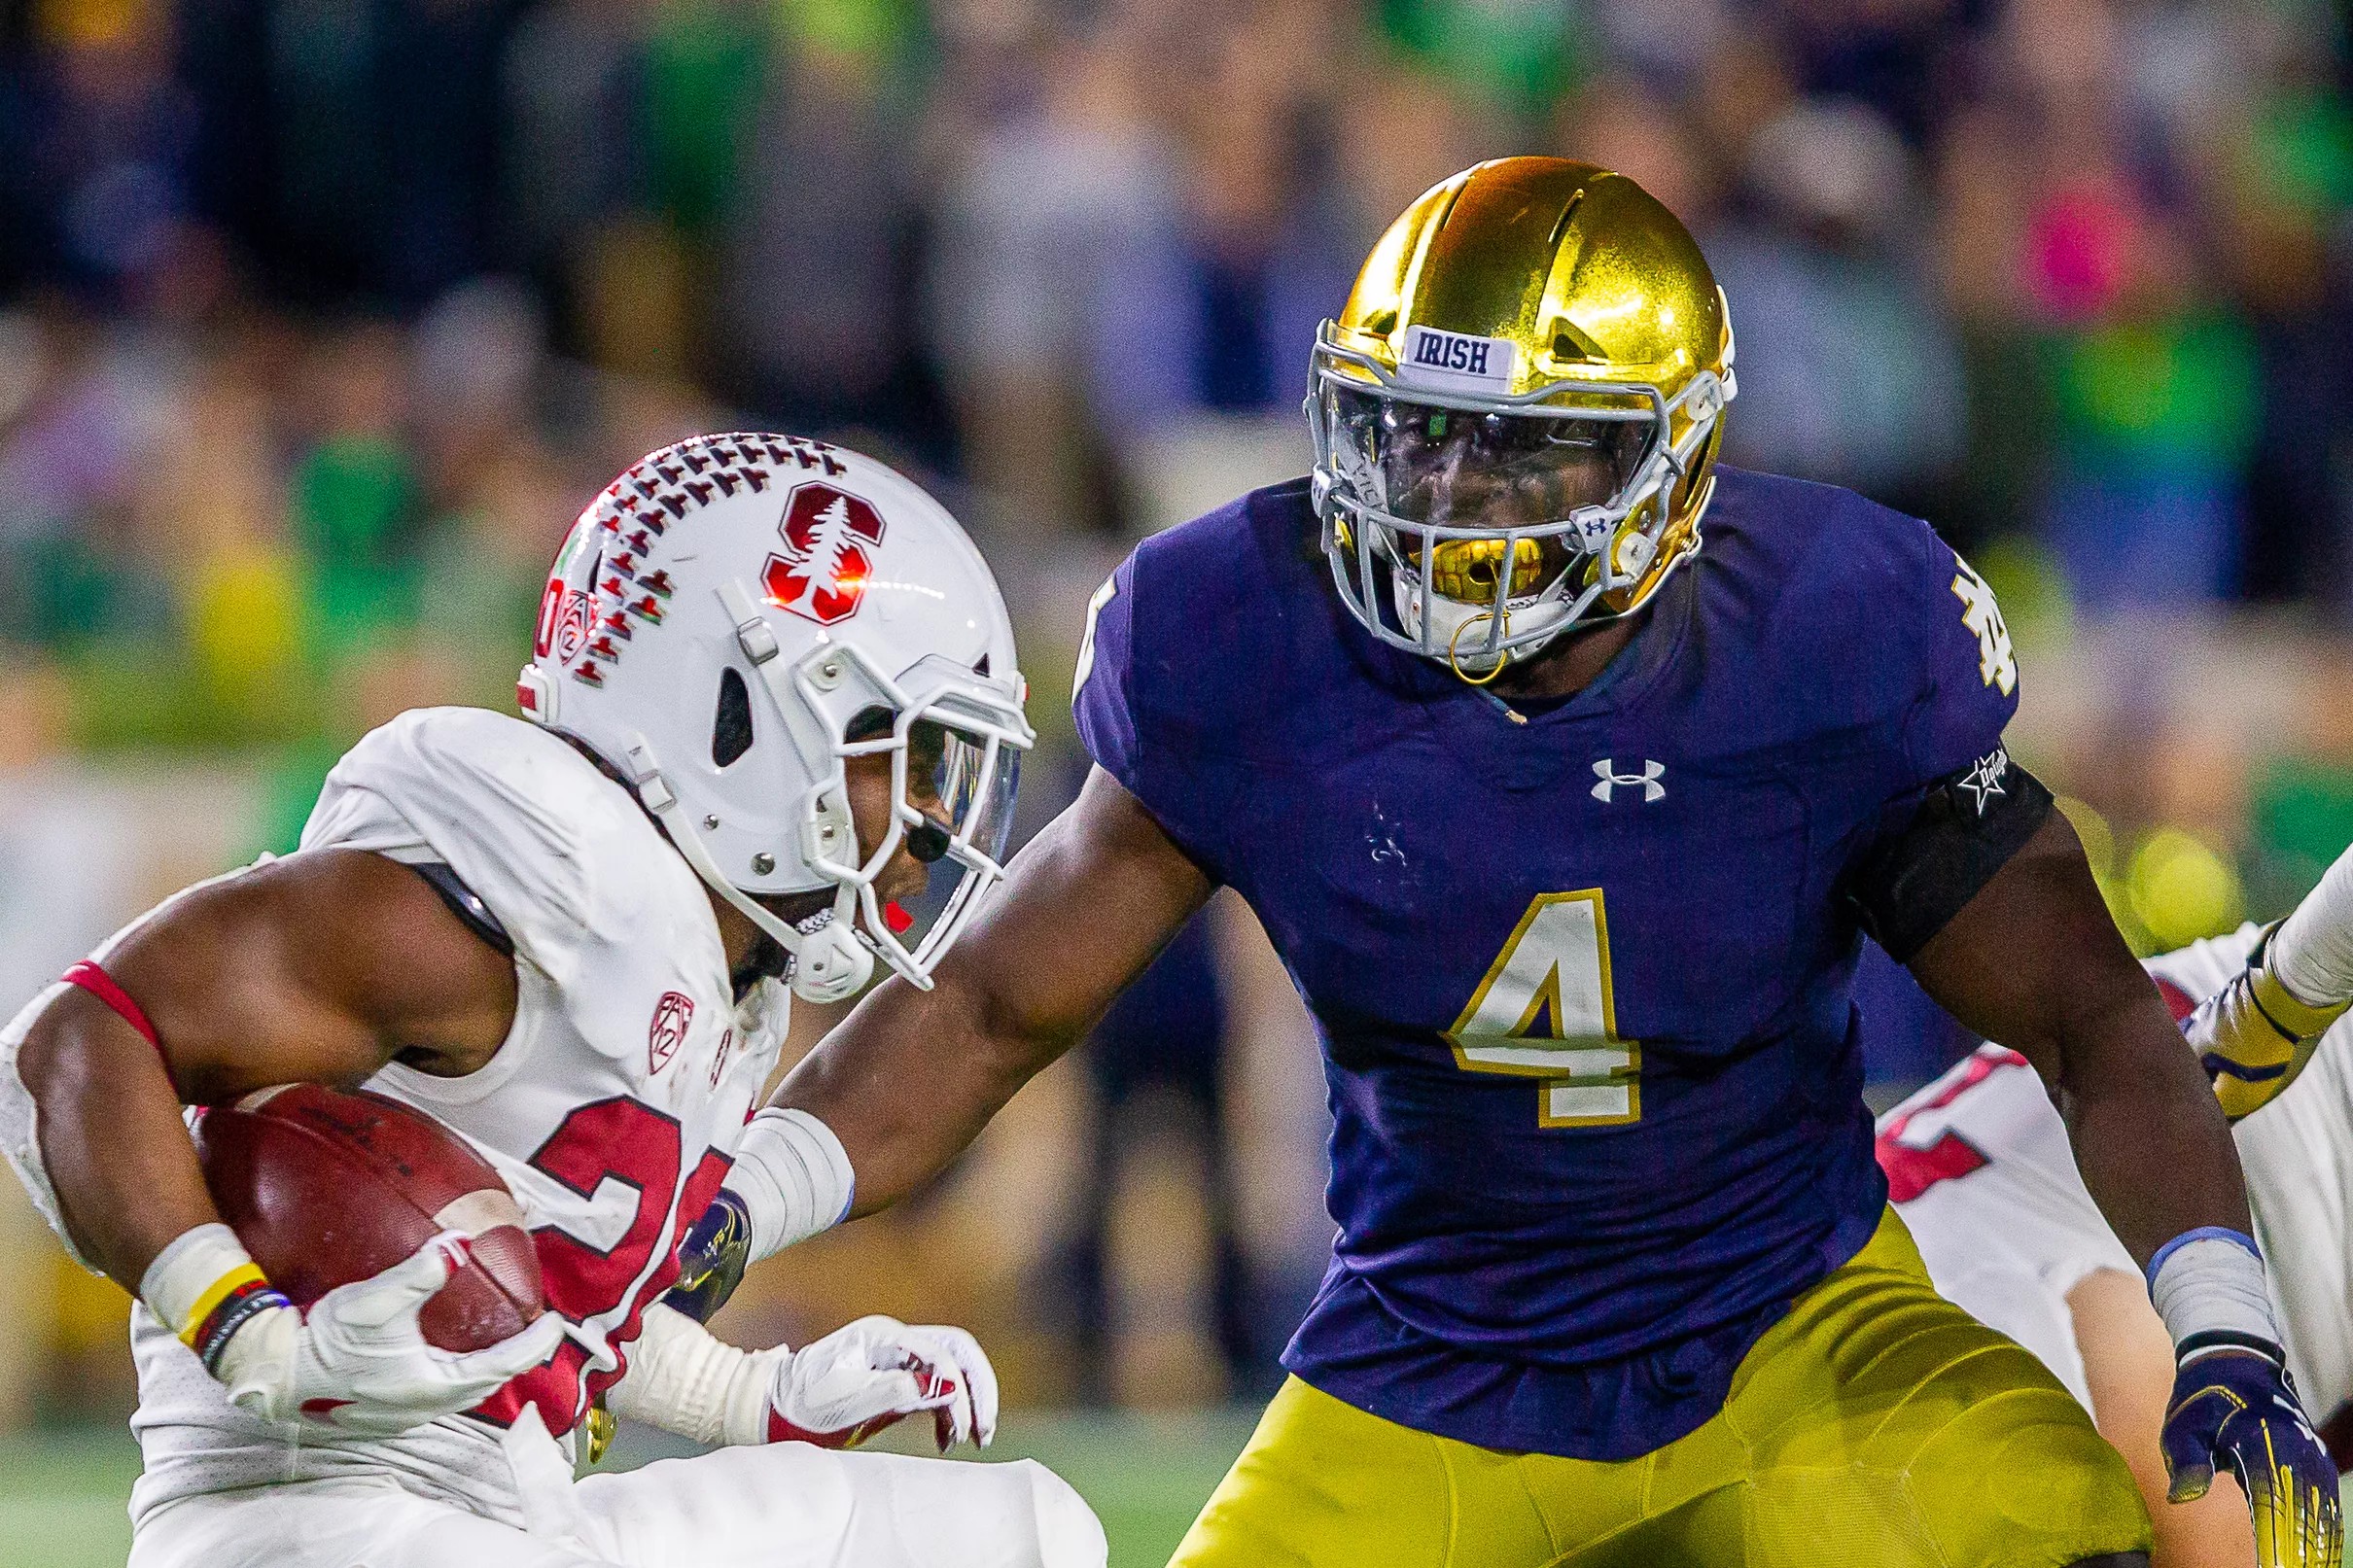 Notre Dame player grades and comparisons for NFL Draft